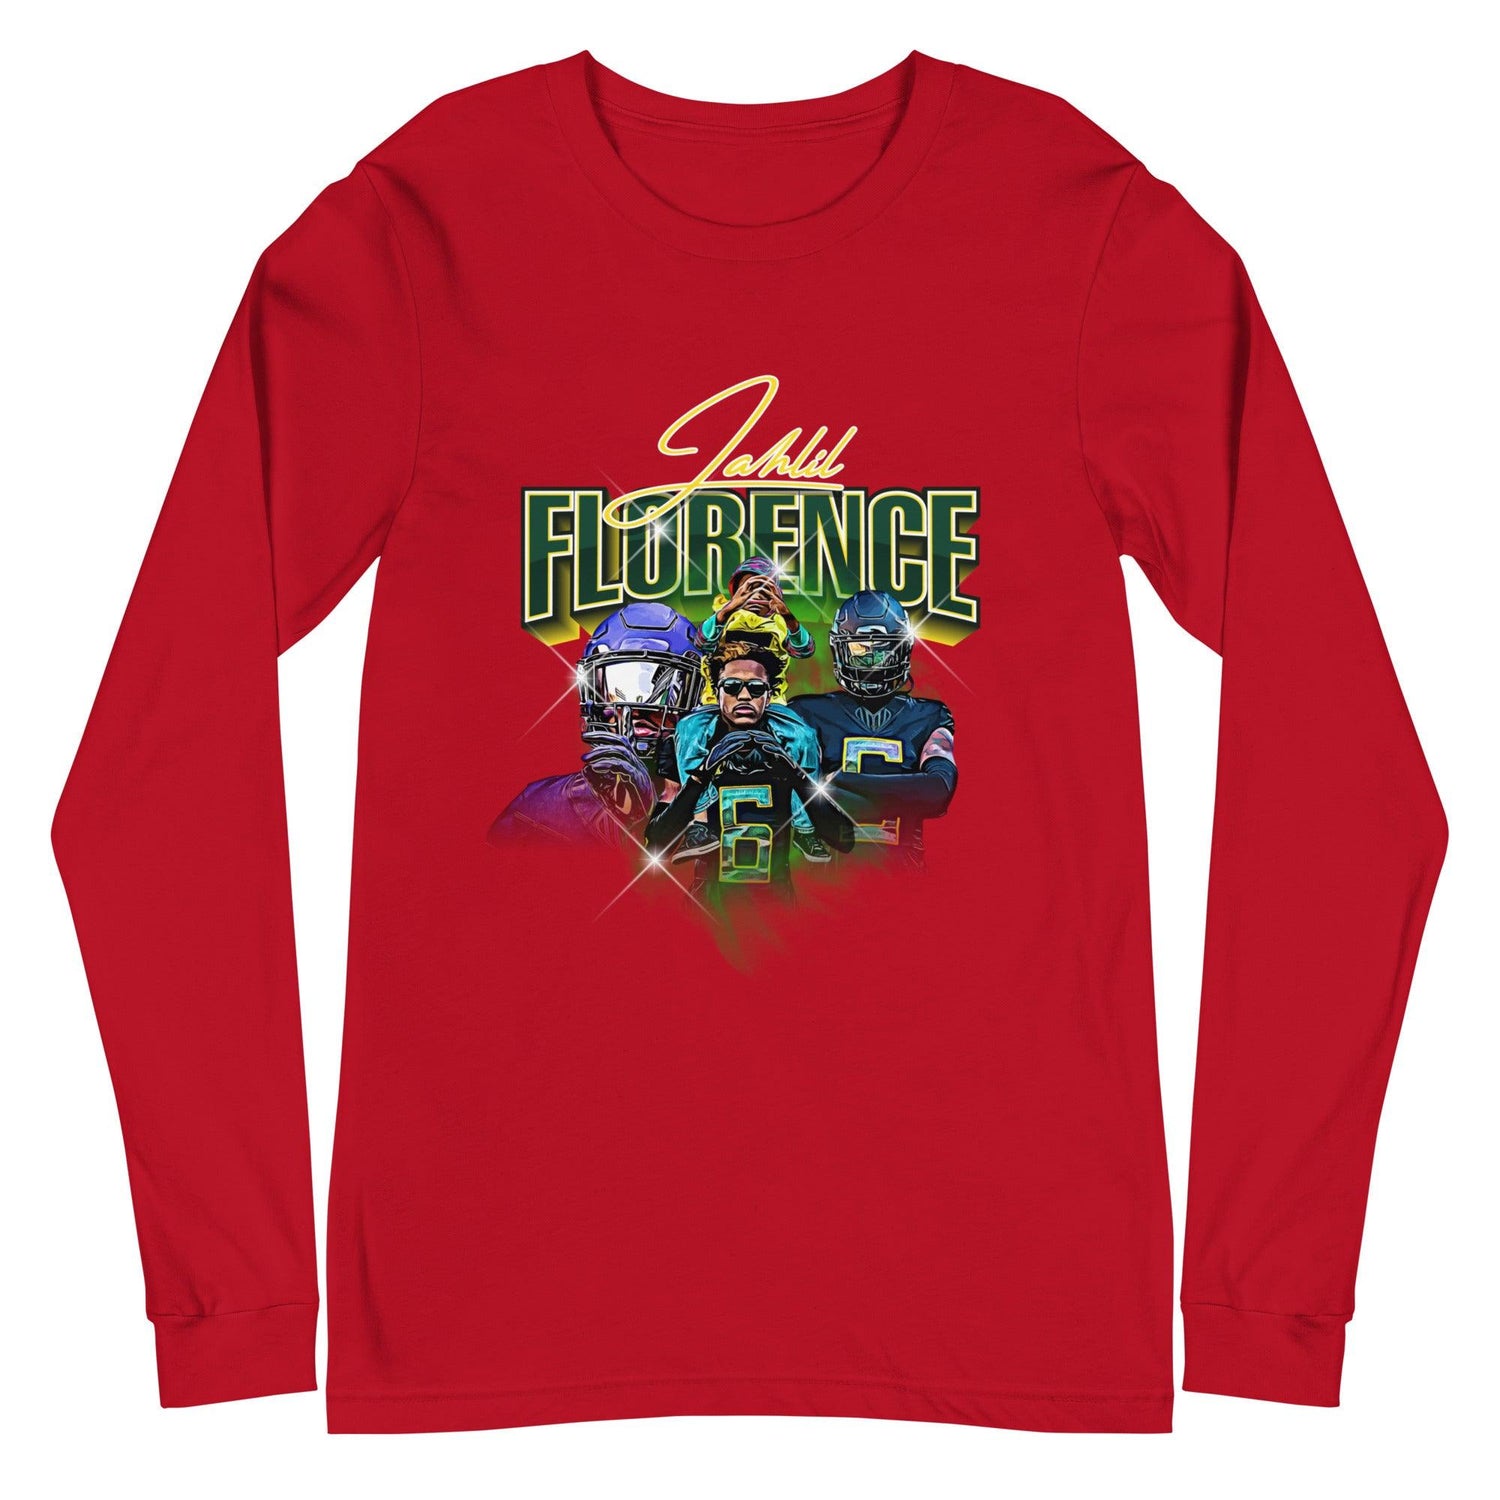 Jahlil Florence “Heritage” Long Sleeve Tee - Fan Arch